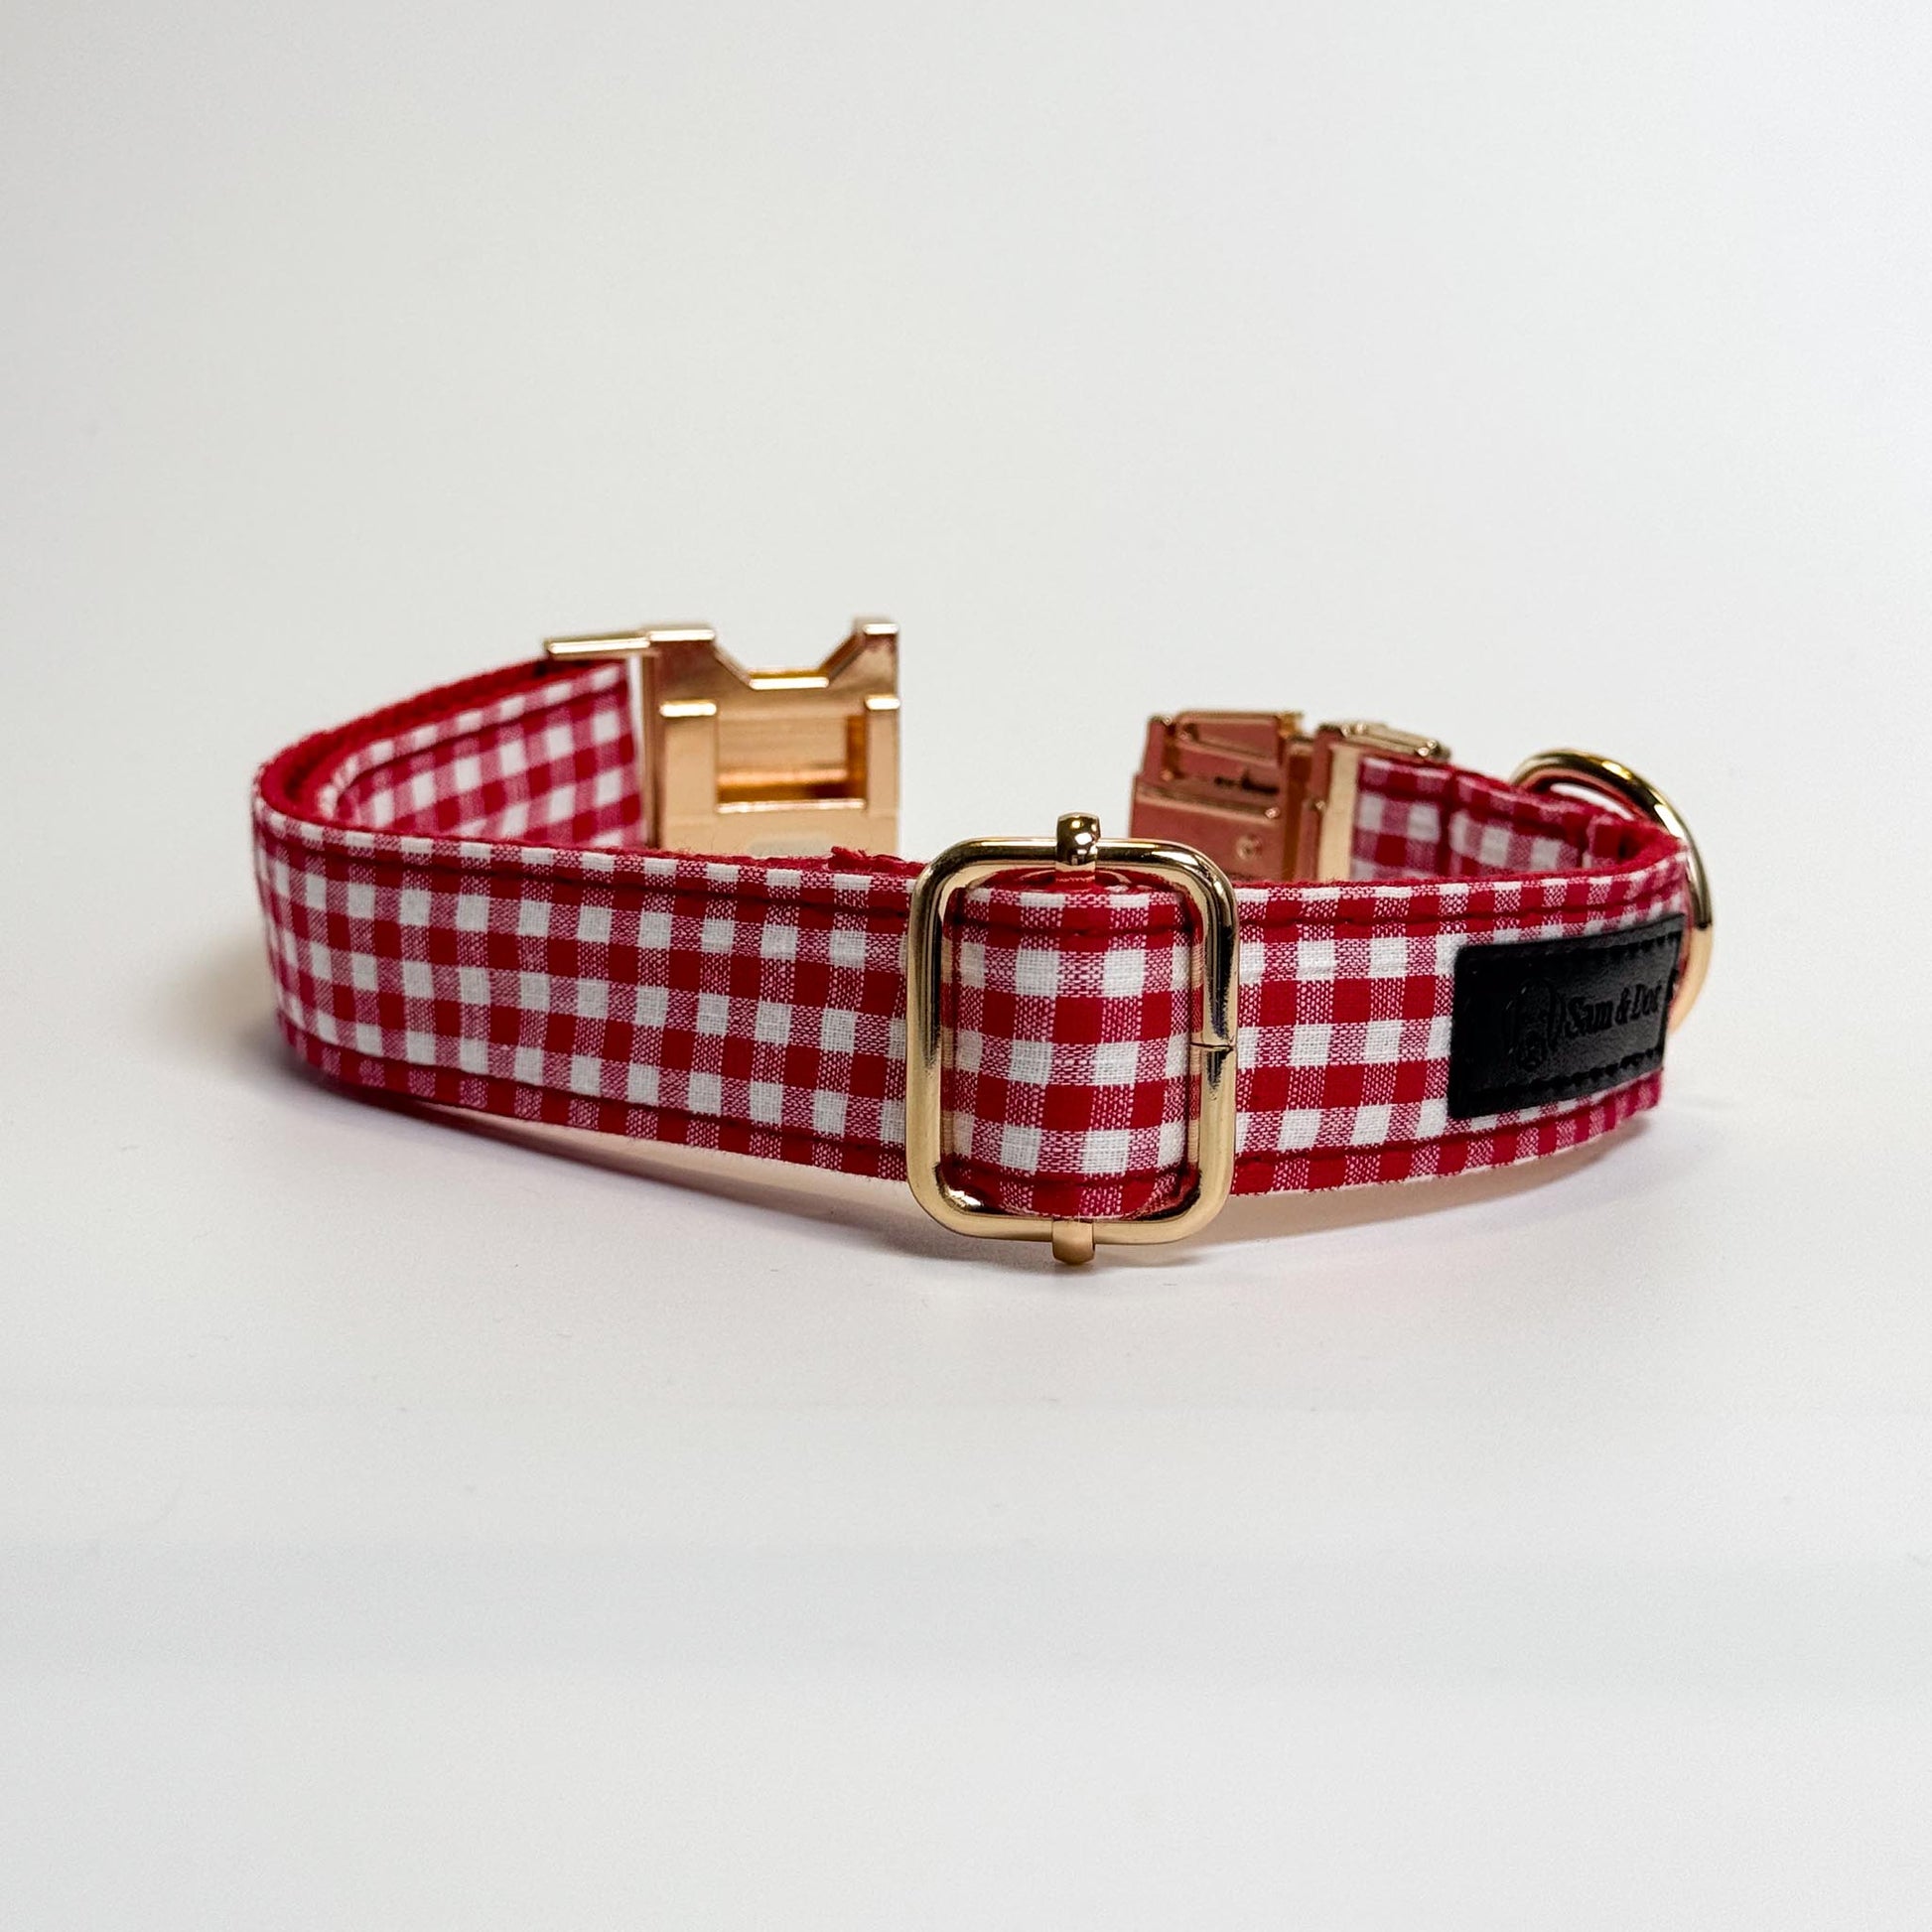 Picnic in the Park Engraved Dog Collar - Sam and Dot